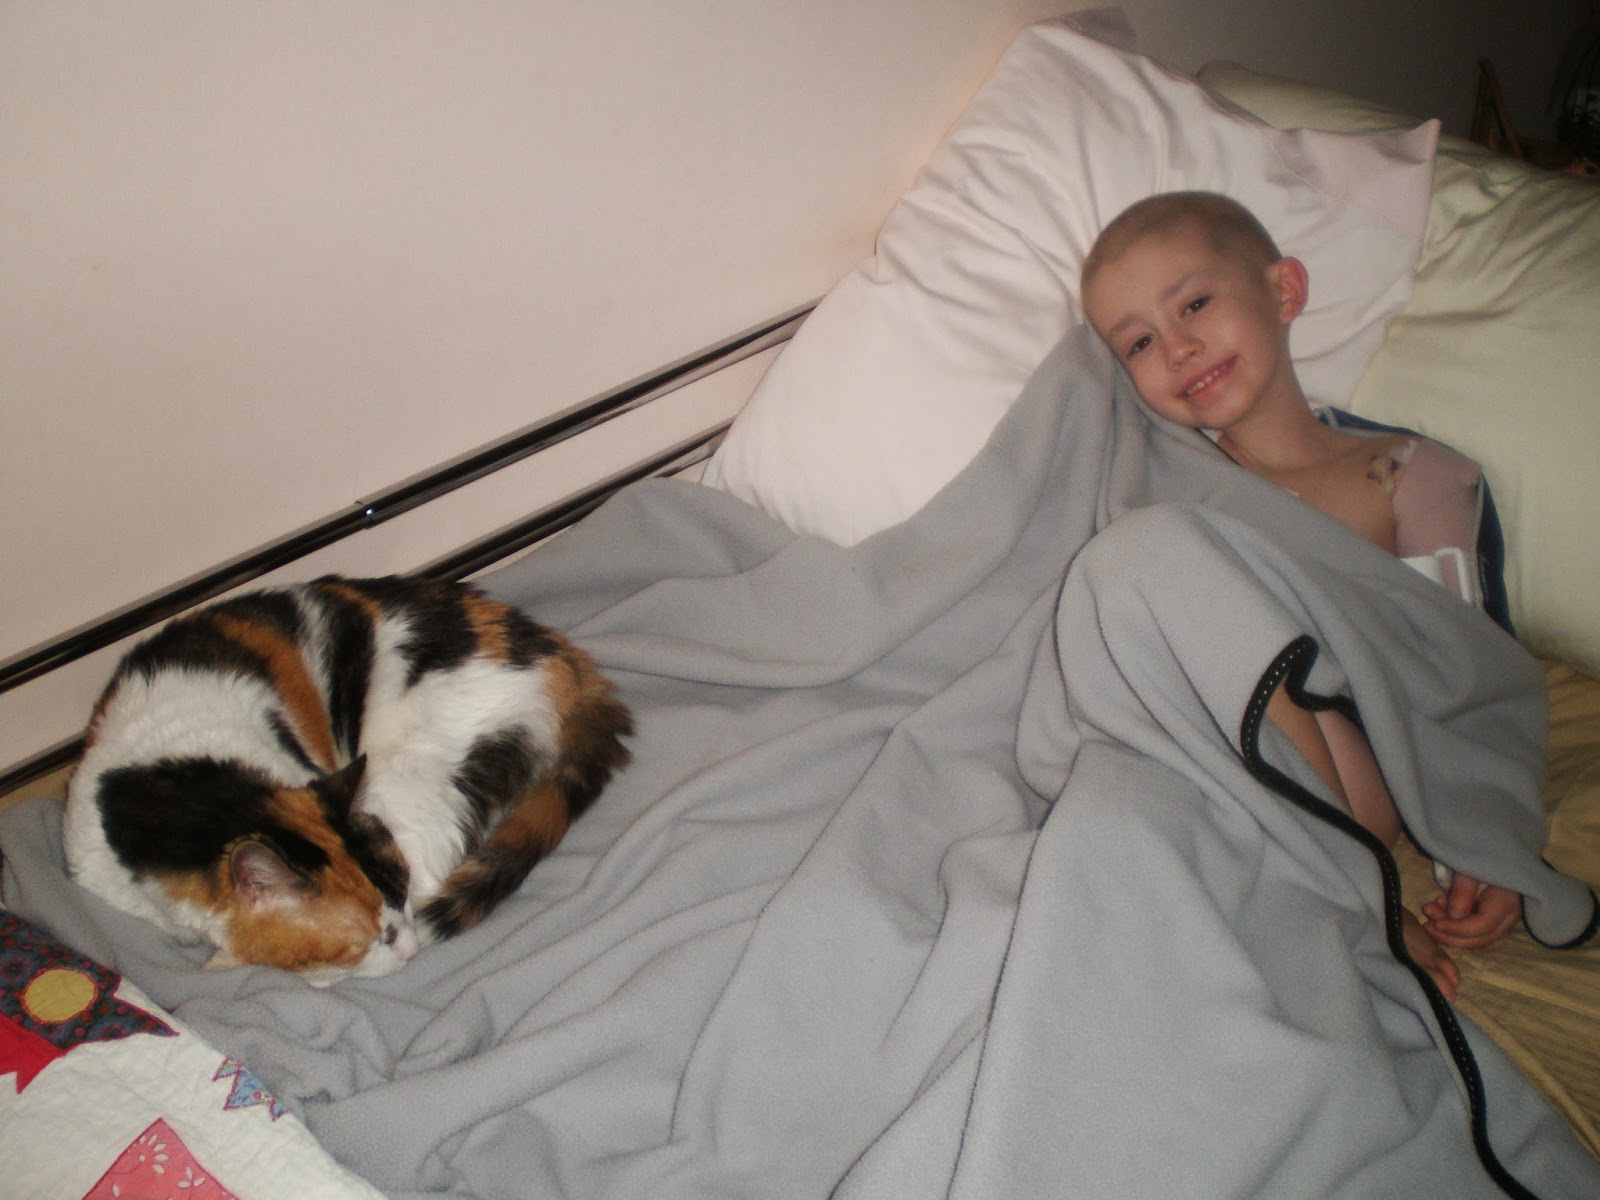 Mattie's Blog and his Fight Against Osteosarcoma